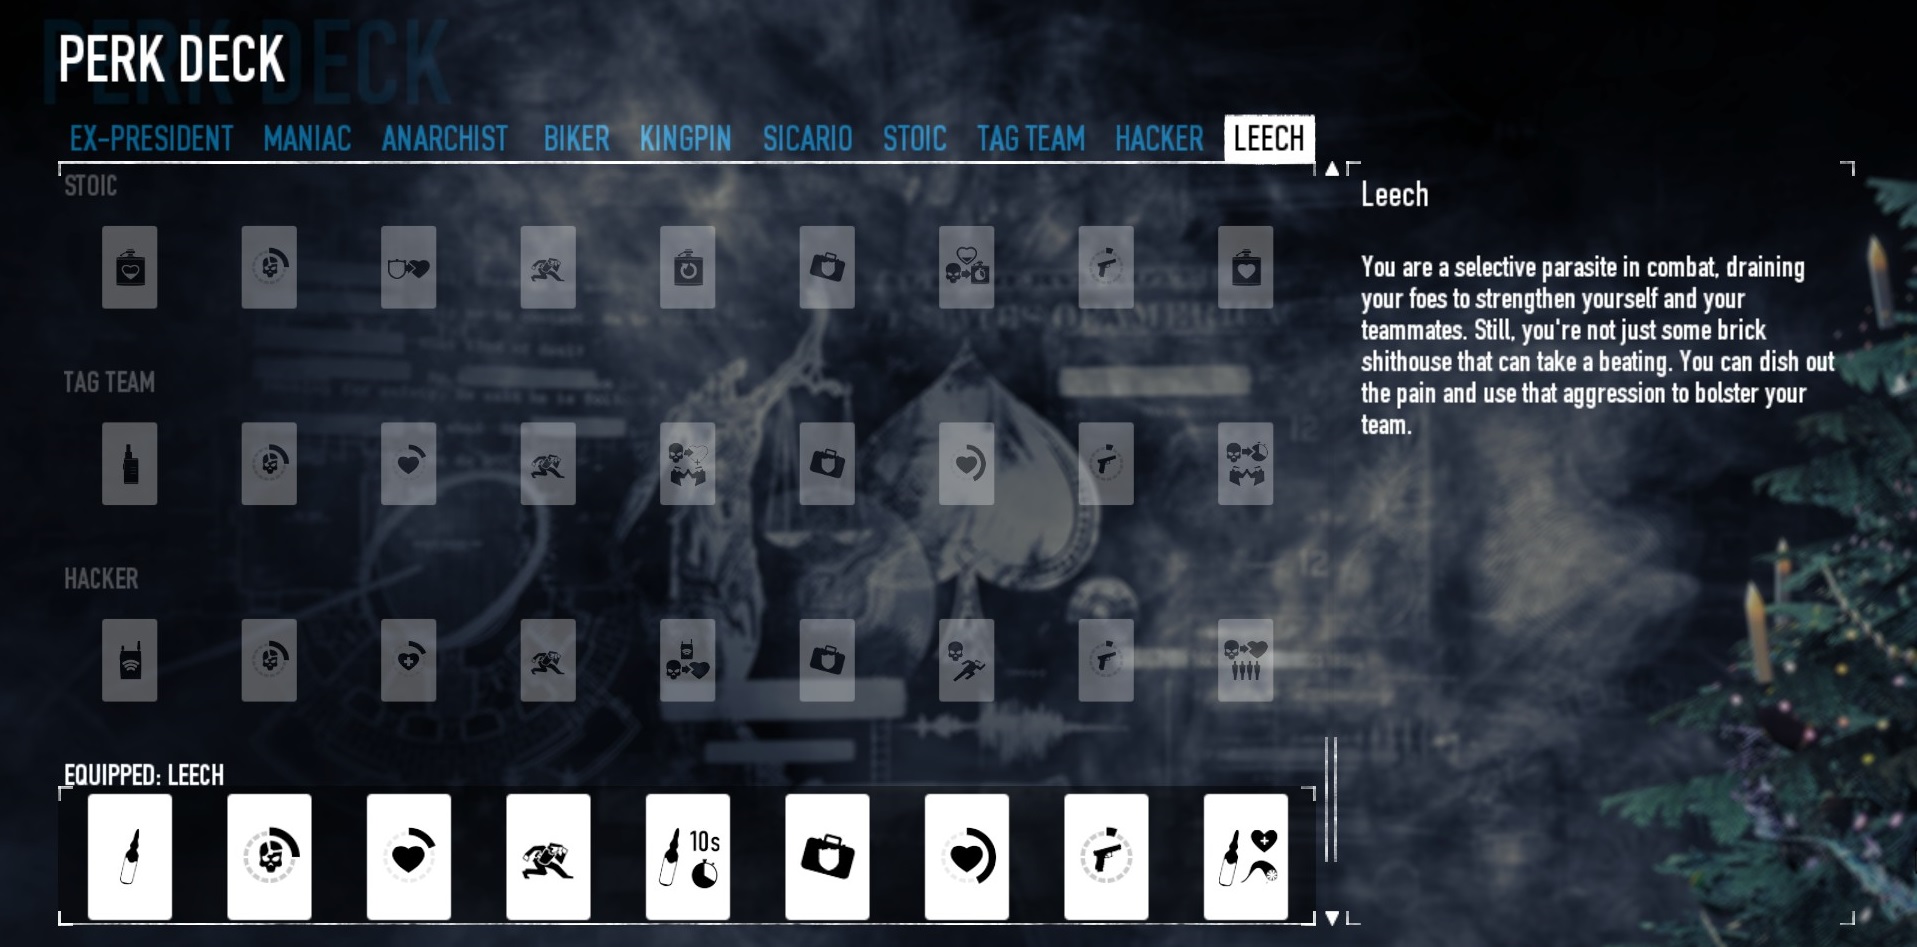 PAYDAY 2 - Leech Build Guide - PERK DECK AND PLAYSTYLE - C2913E3